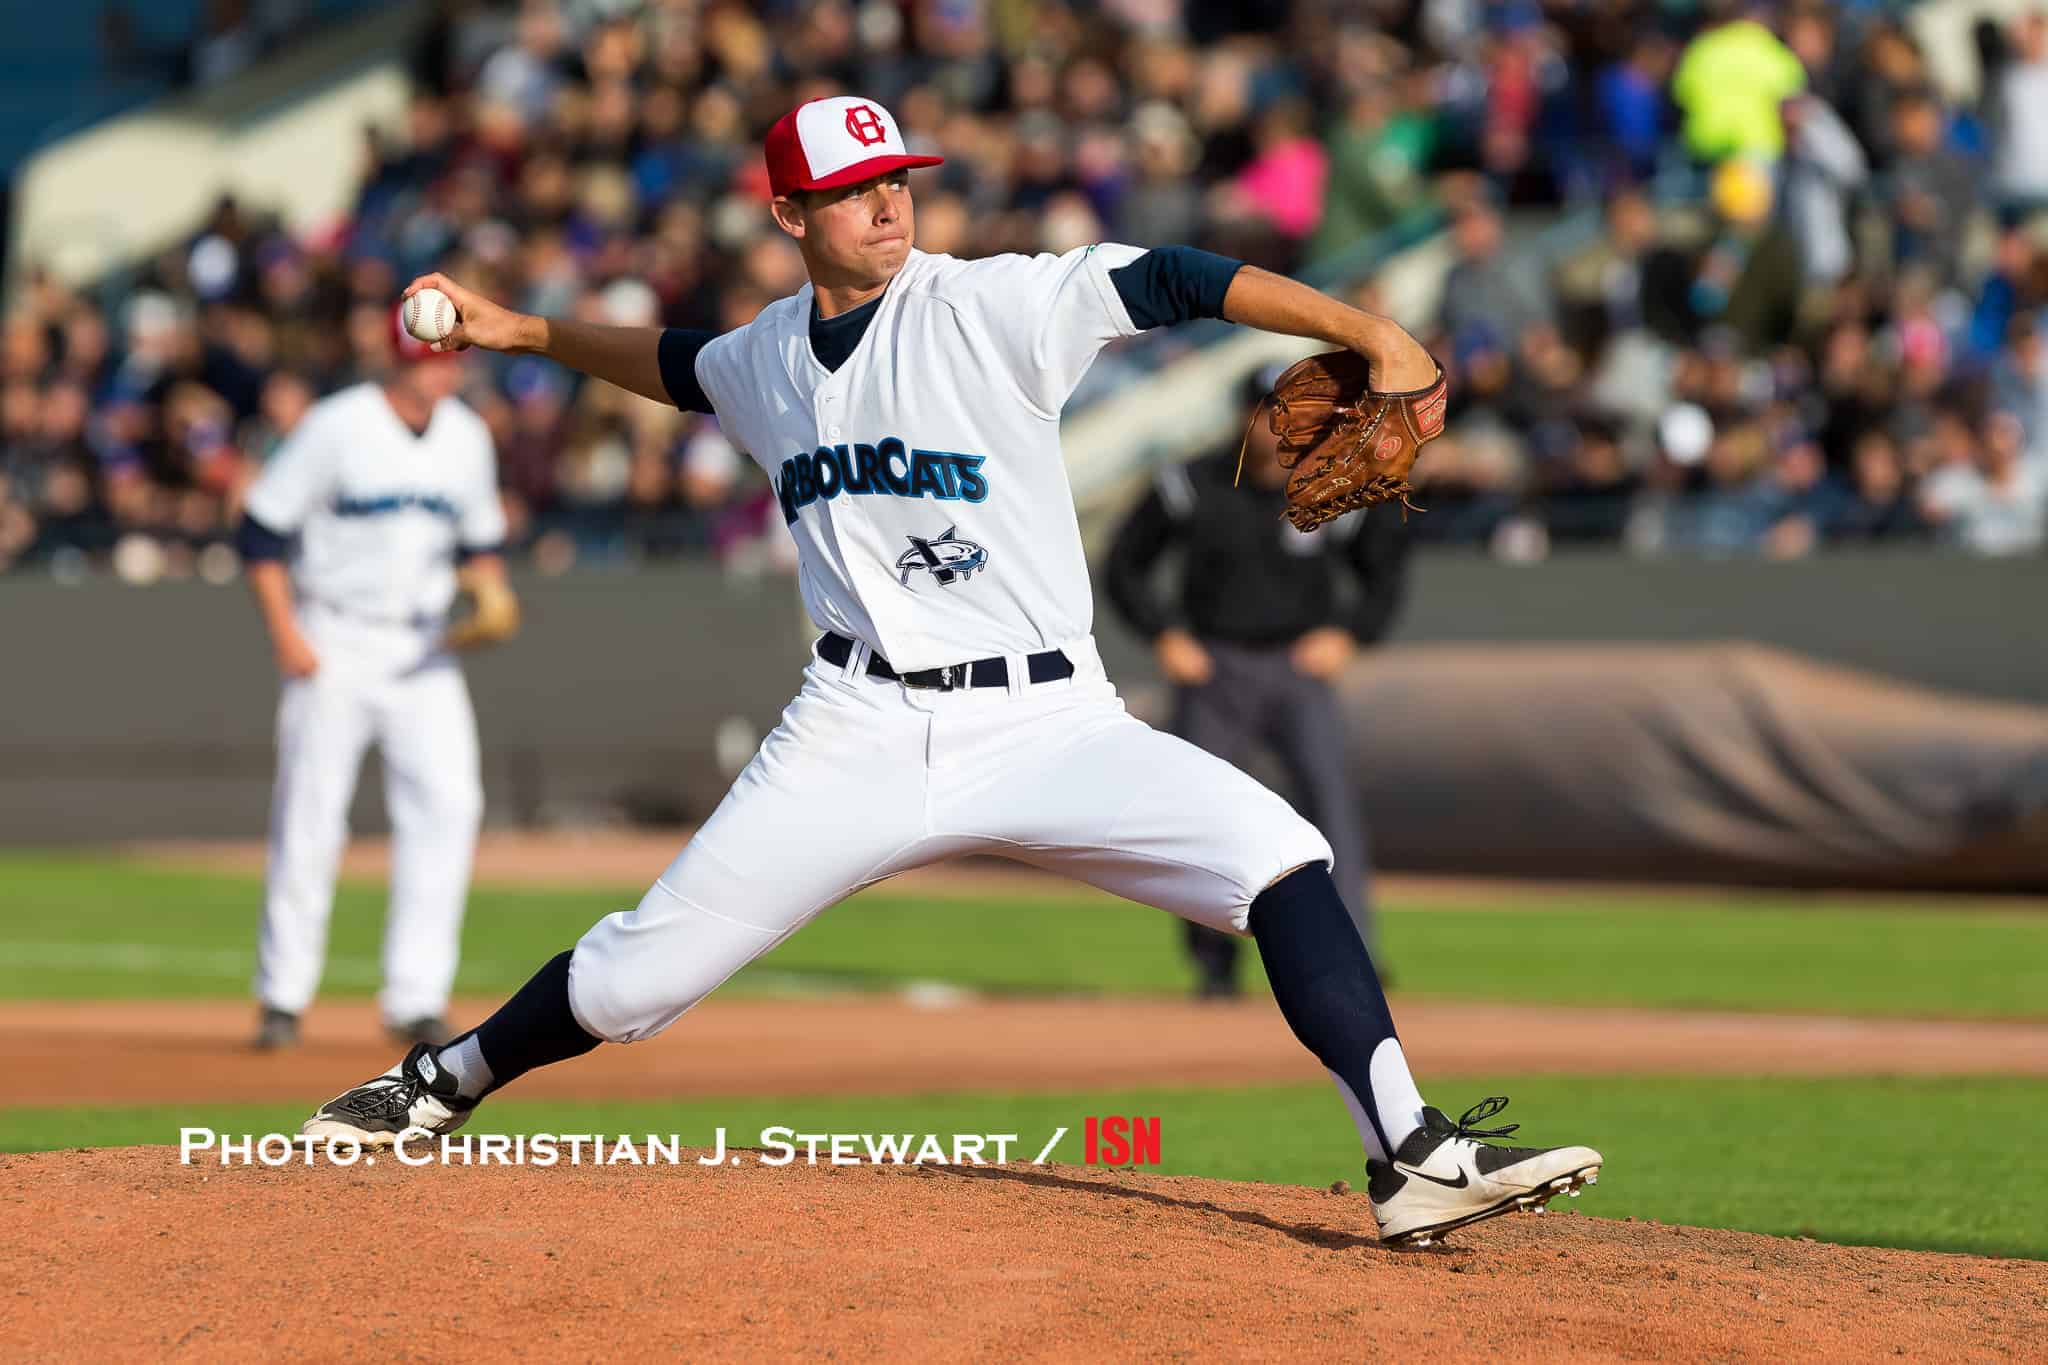 HarbourCats Tie WCL Record With Win Over Yakima